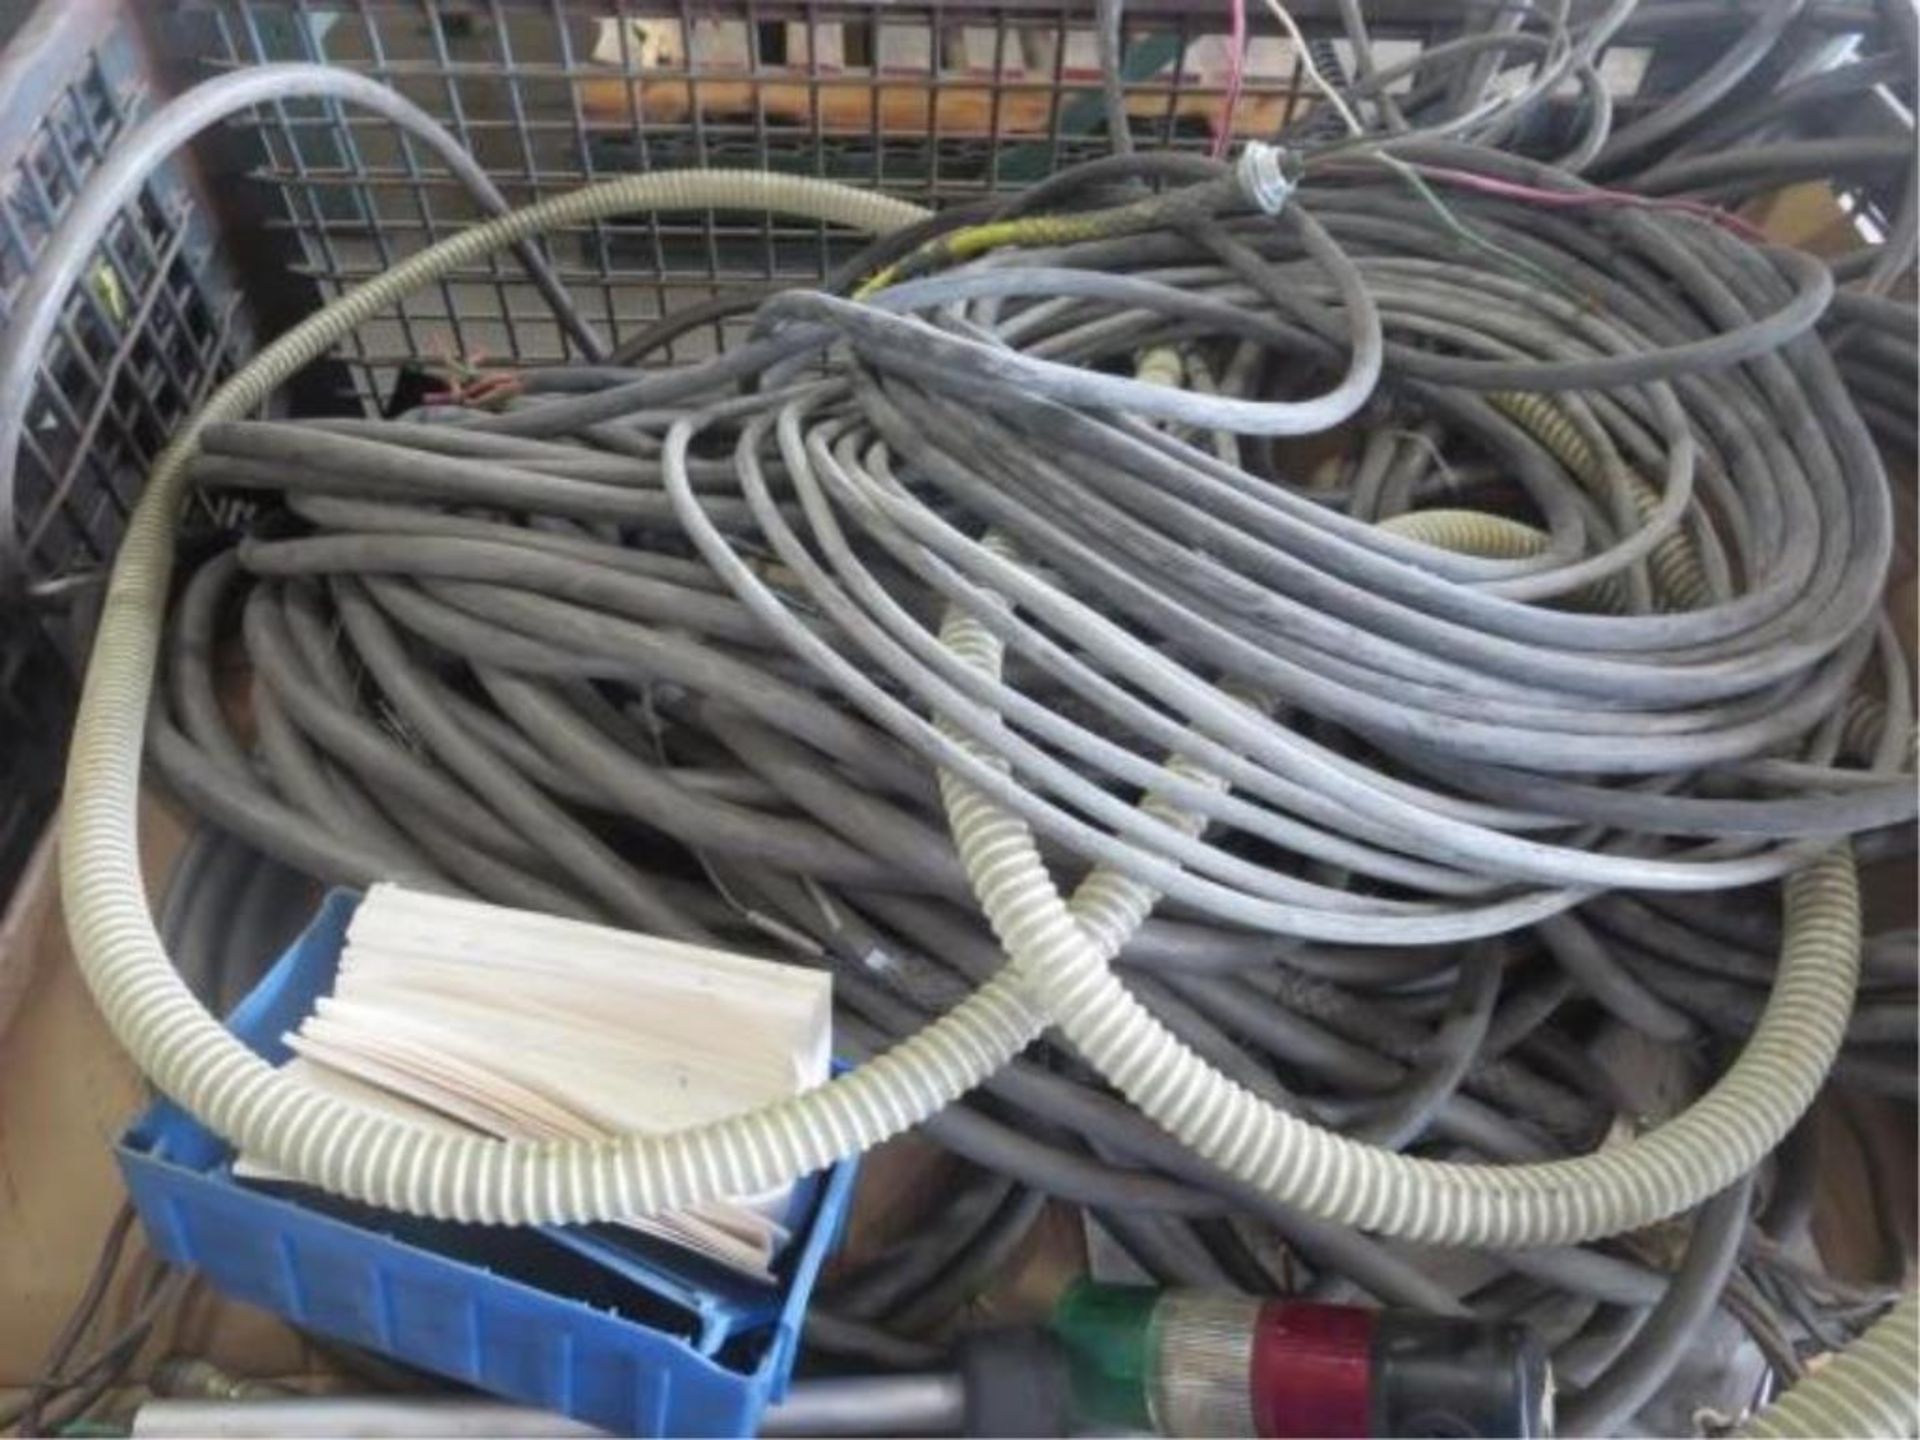 Lot (Qty 5 Skids) Consisting of pipe fittings, Electrical cords, Industrial Lights, Gear box, heavy - Bild 4 aus 18